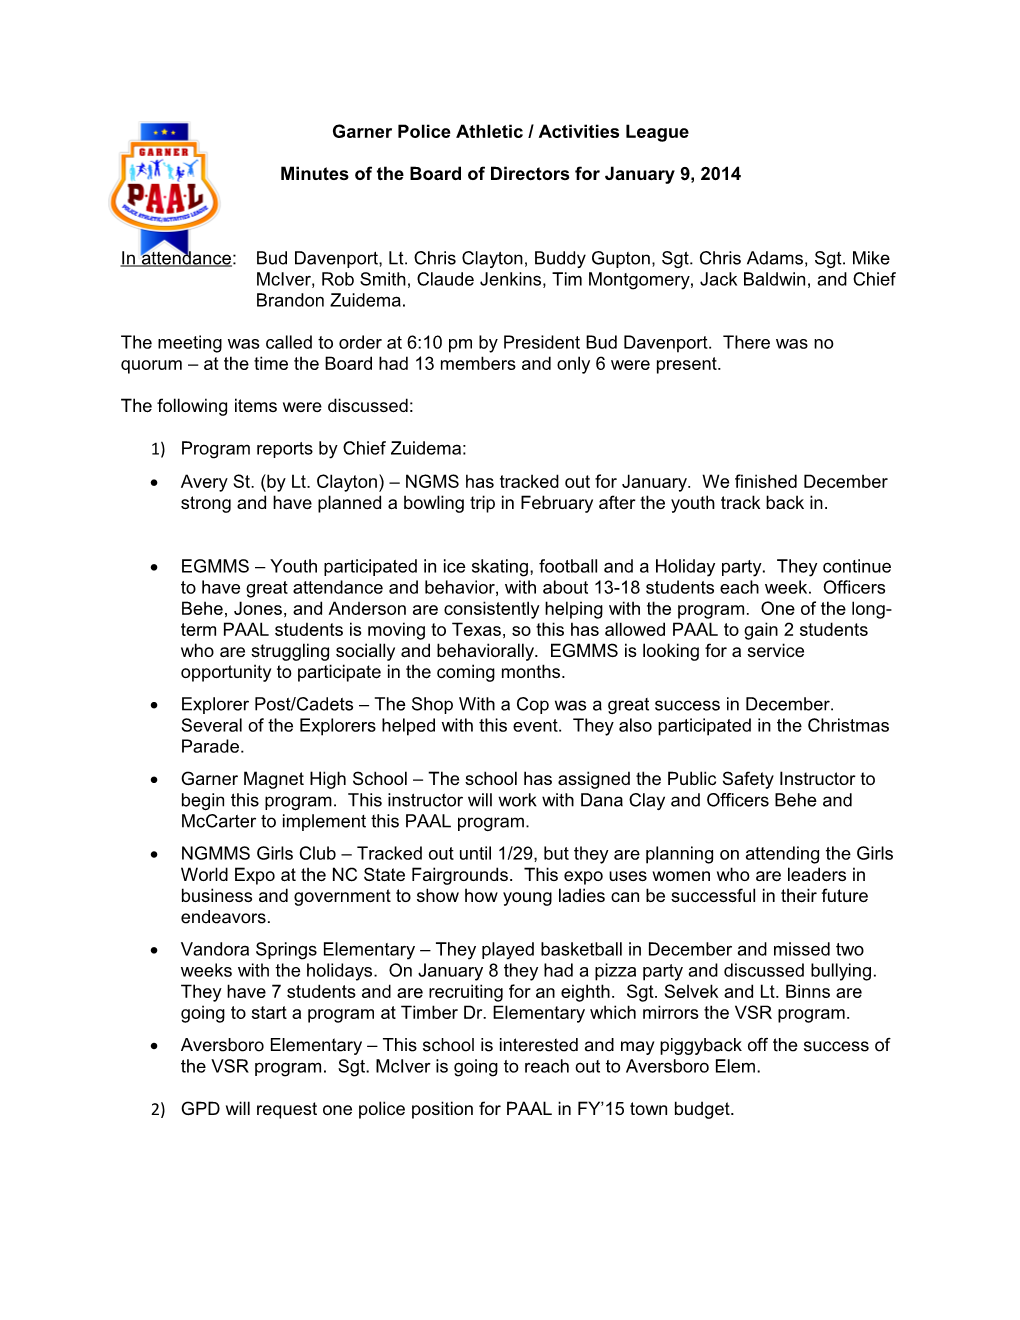 Minutes of the Board of Directors for January 9, 2014